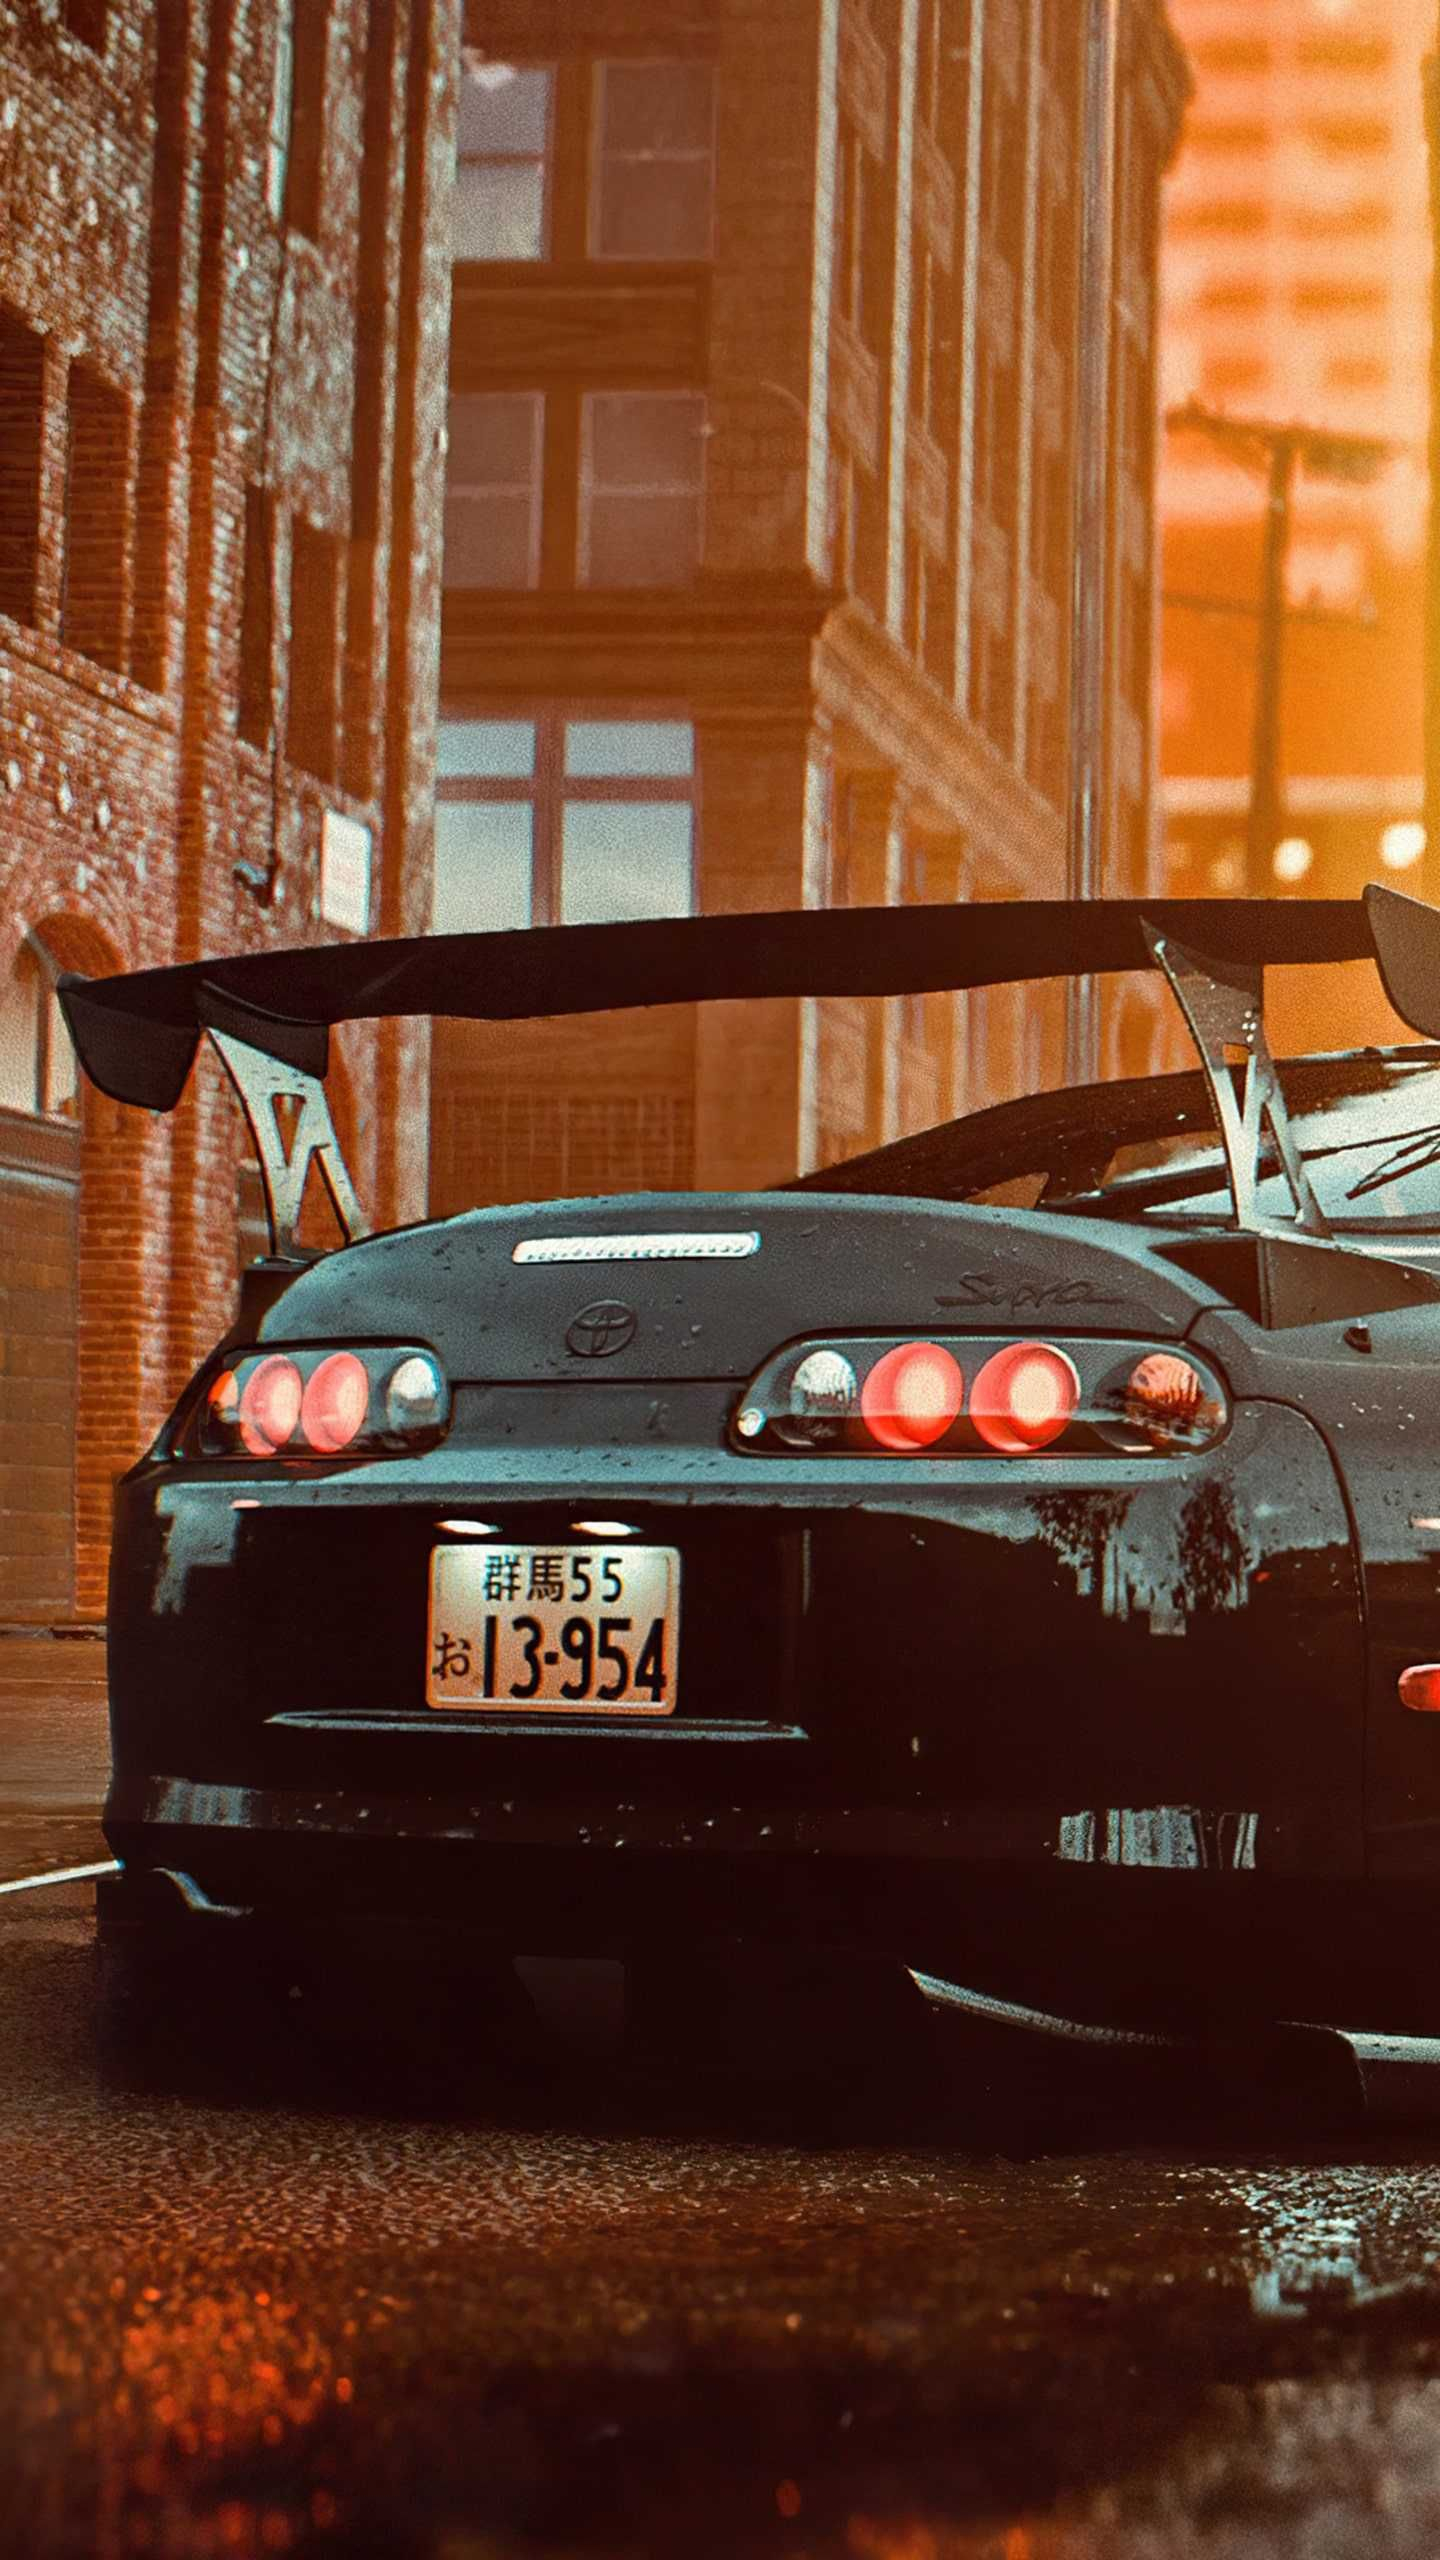 1440x2560 Supra Wallpaper Browse Supra Wallpaper with collections of Drift, Iphone, Jdm, Supra, Toyota Gr. ;&#128;&brvbar; | Toyota supra mk4, Jdm wallpaper, Toyota supra